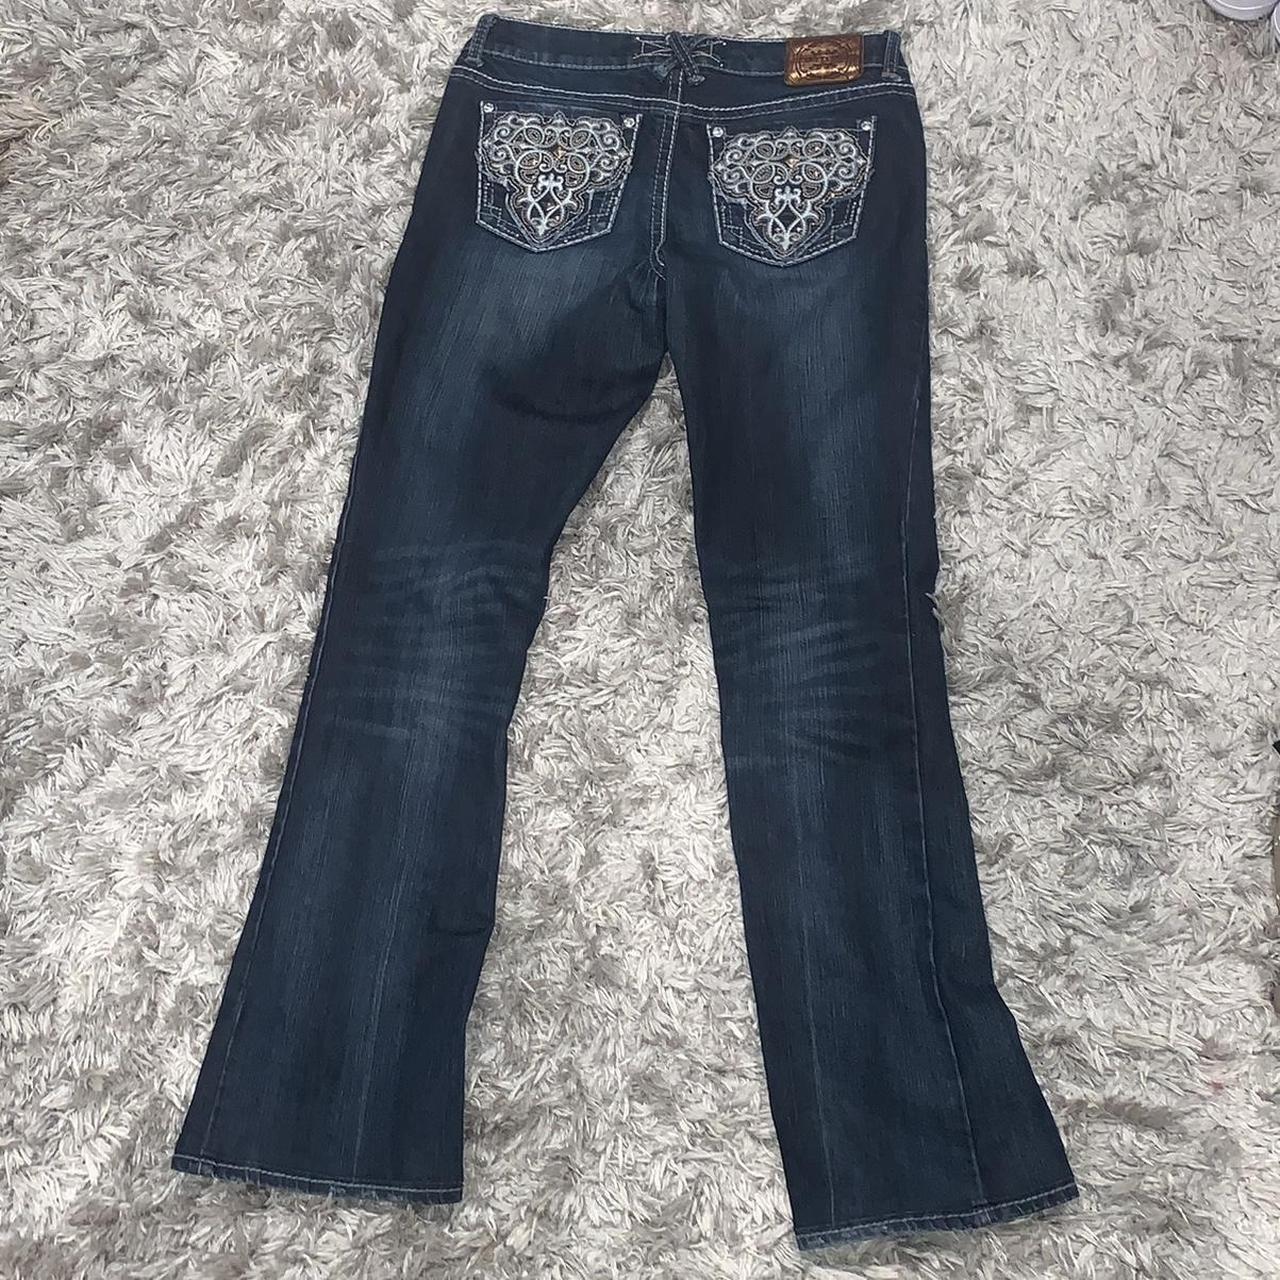 Miss Me Women's Navy and Blue Jeans | Depop